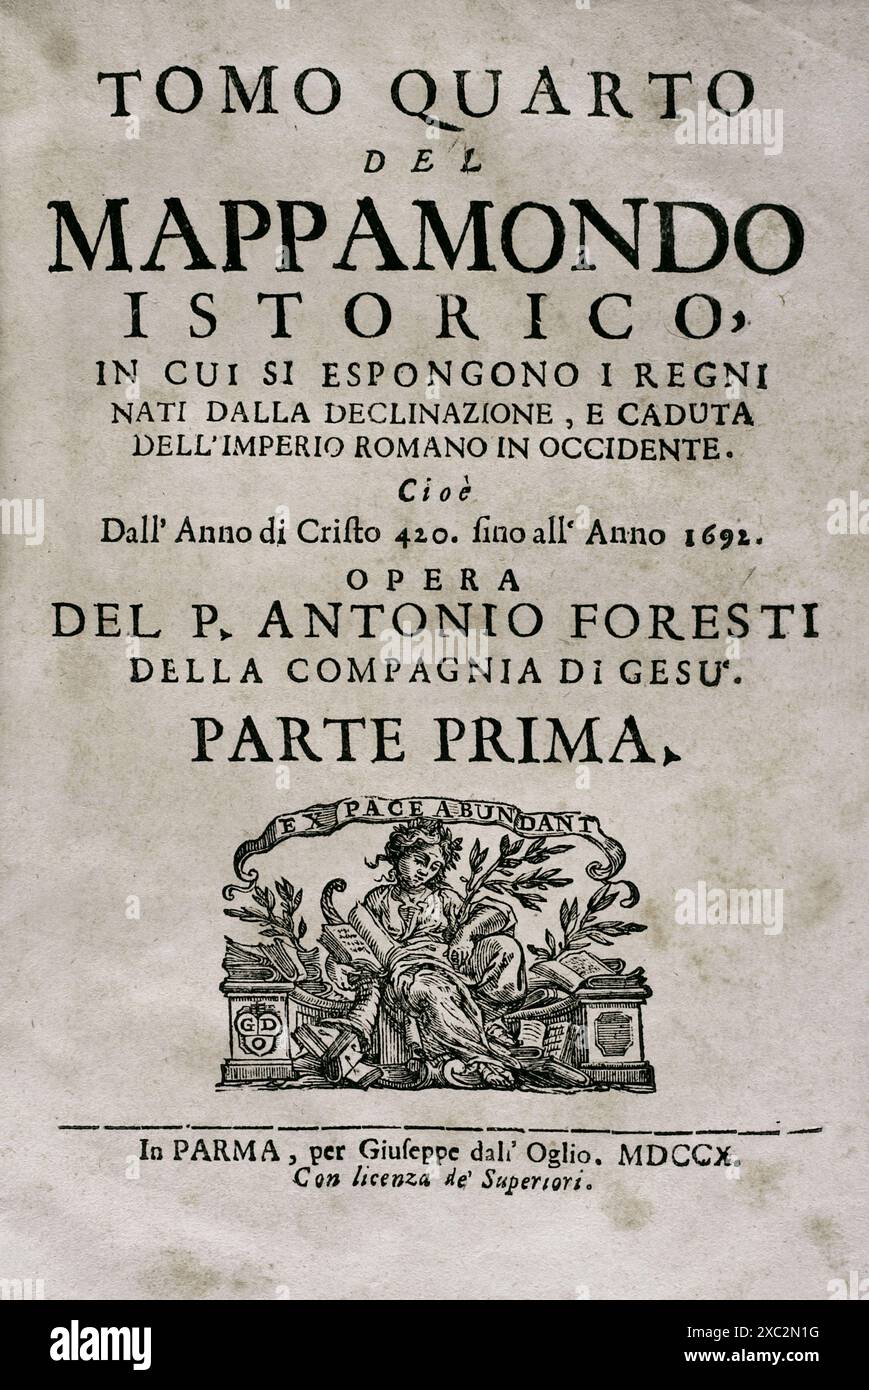 'Mappamondo Istorico'. Volume IV. Kingdoms arising from the decline and fall of the Roman Empire in the Western. From 420 AD to 1692 AD. By Father Antonio Foresti (1625-1692), of the Society of Jesus. Parma, 1710. Stock Photo